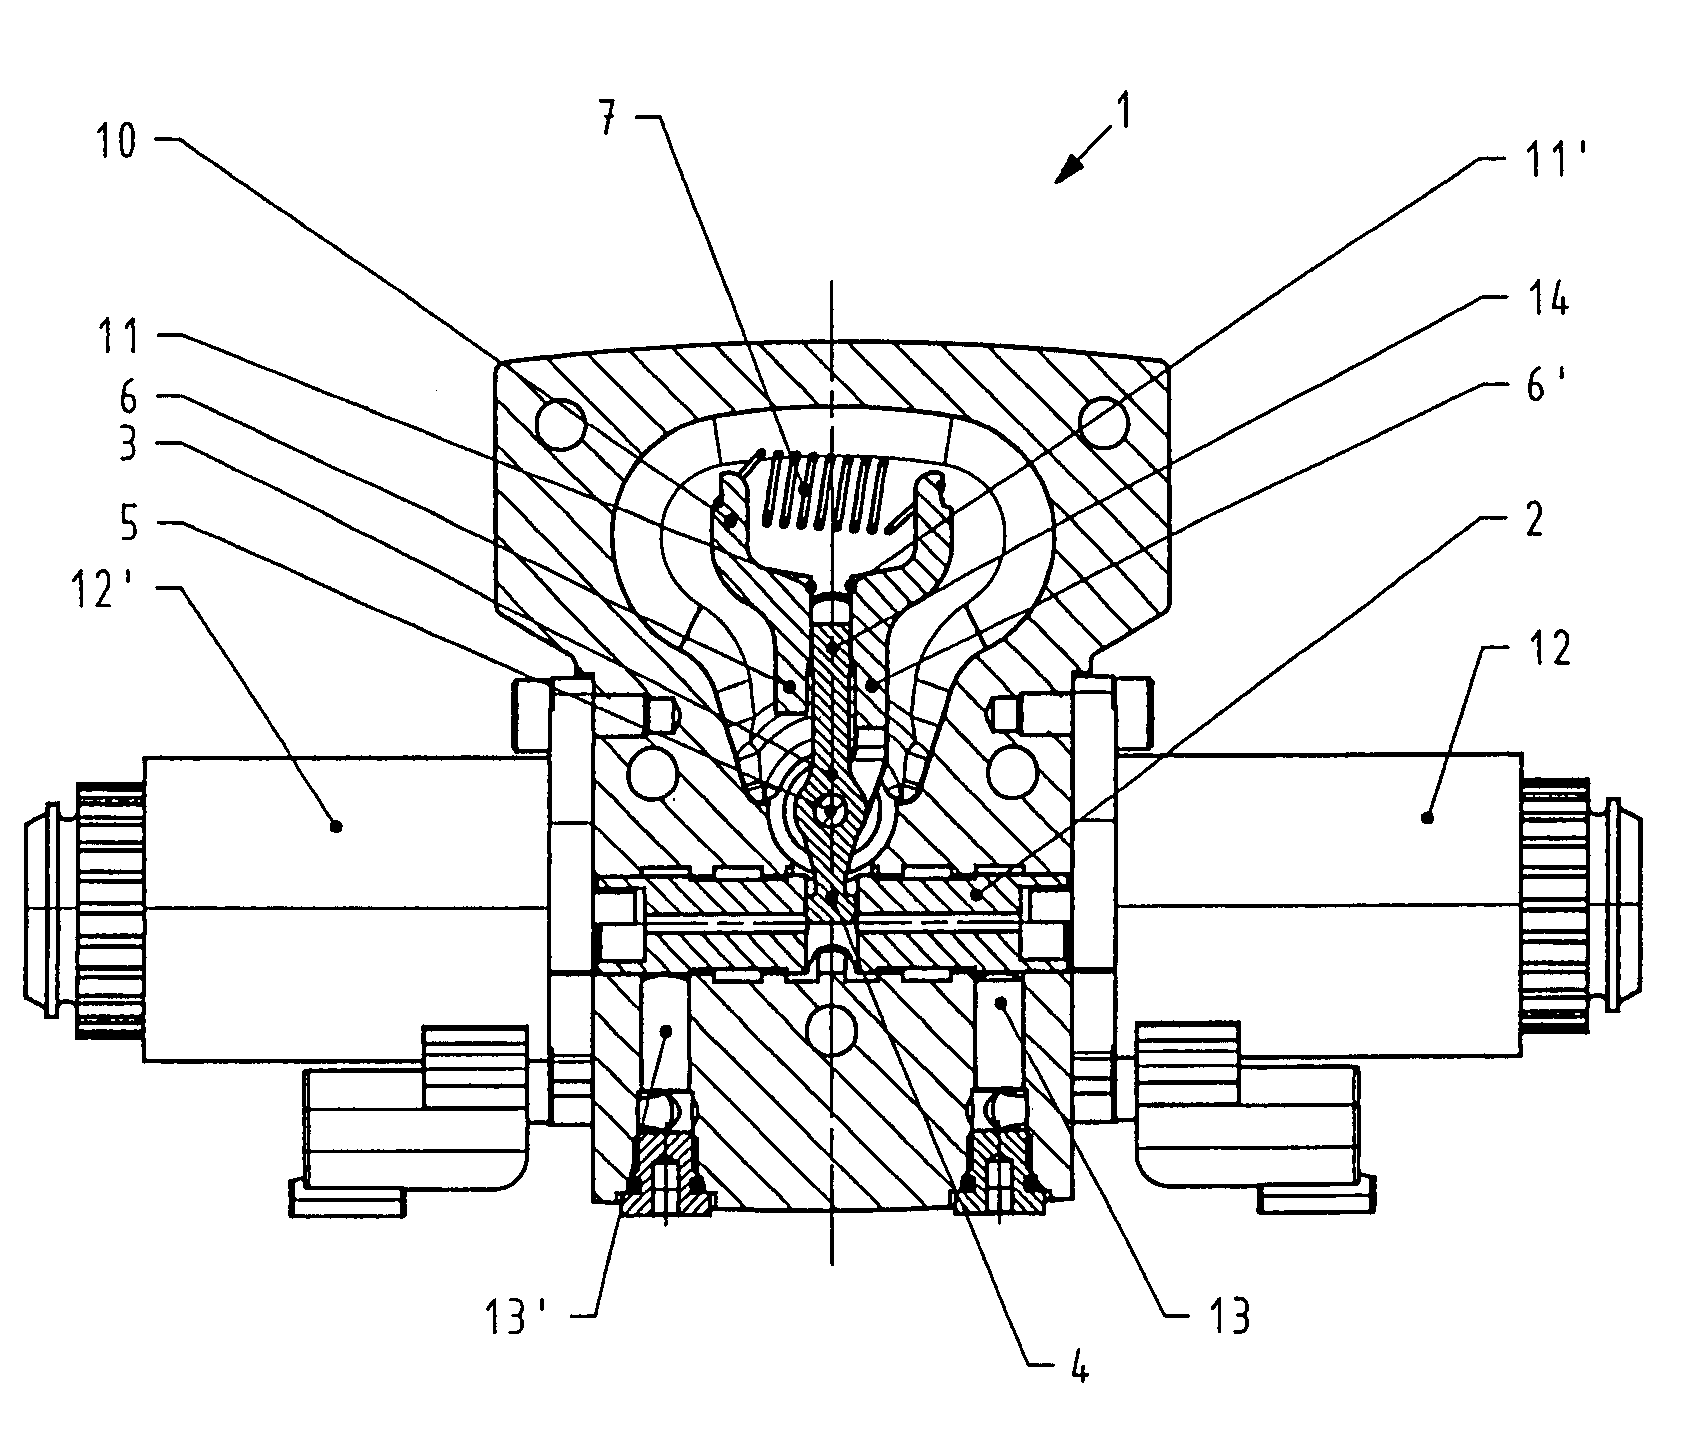 Axial piston machine having a device for the electrically proportional adjustment of the volumetric displacement